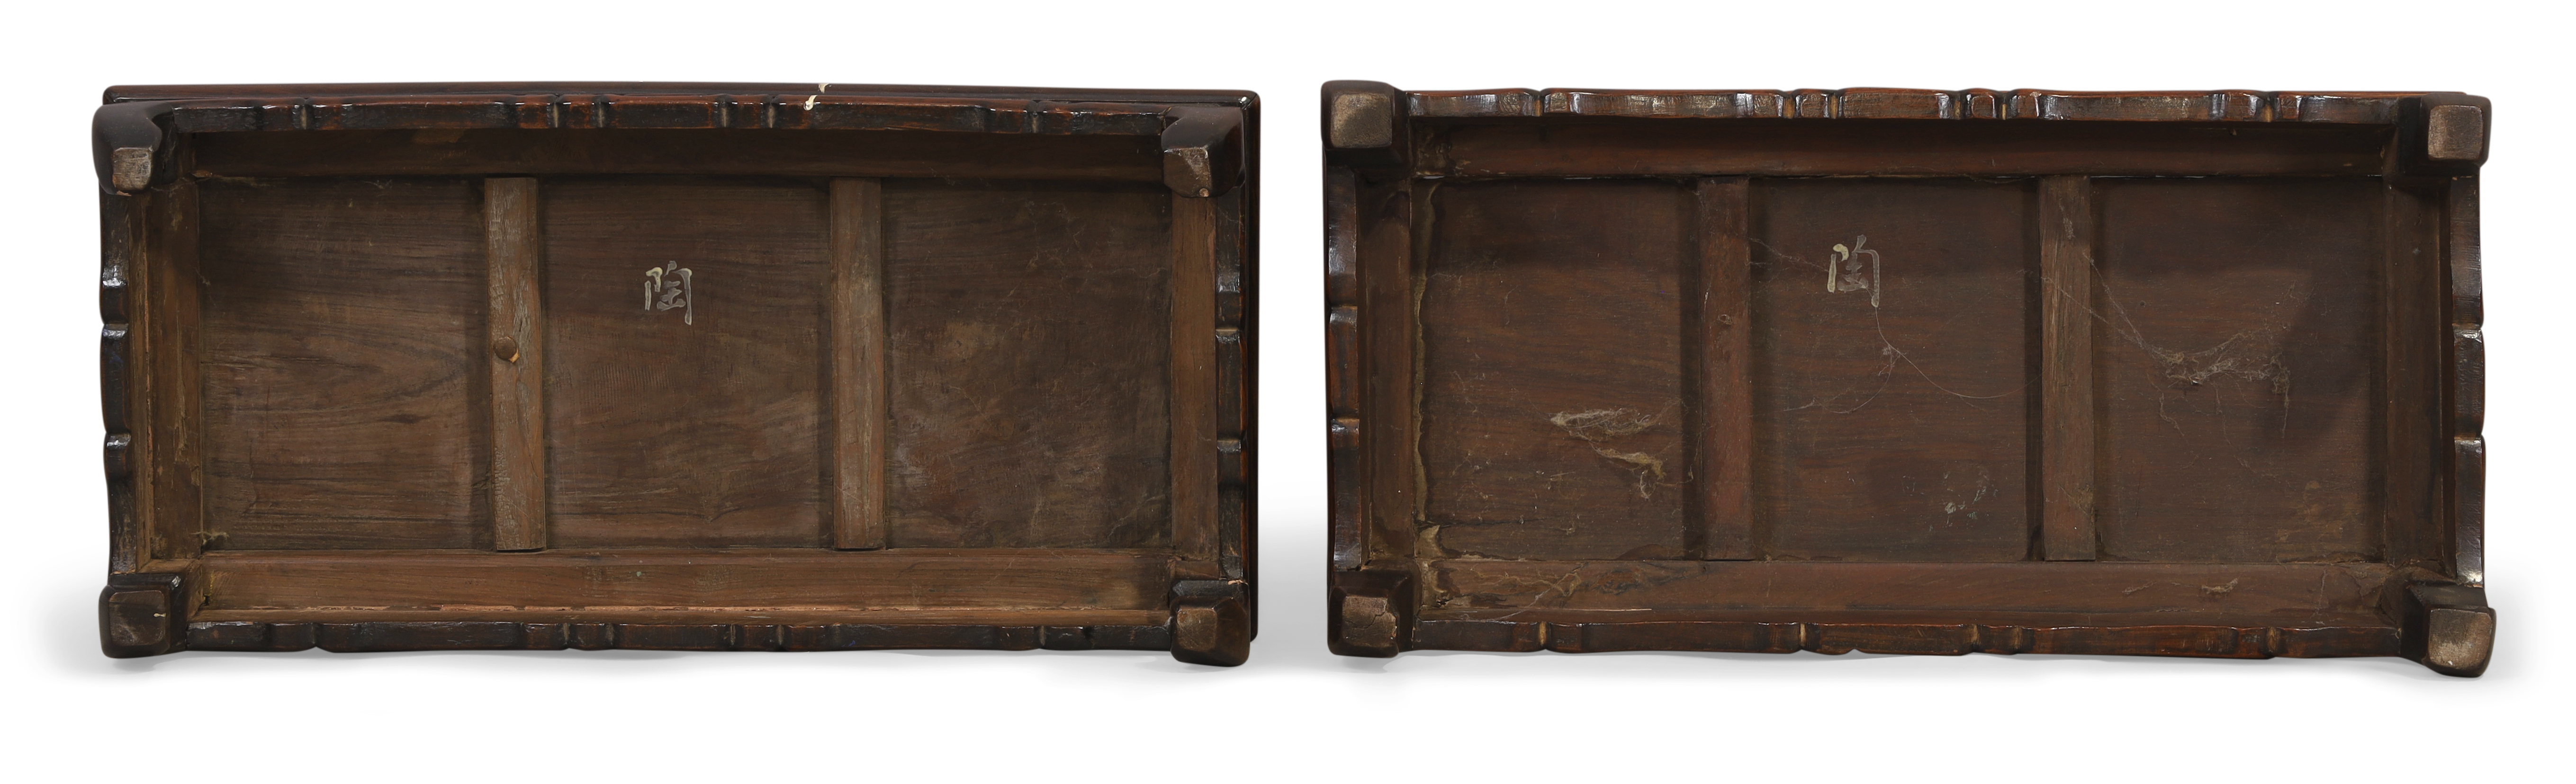 A pair of Chinese hongmu scholar’s stands, Qing dynasty, 19th century, Each formed as a kang tabl... - Image 3 of 3